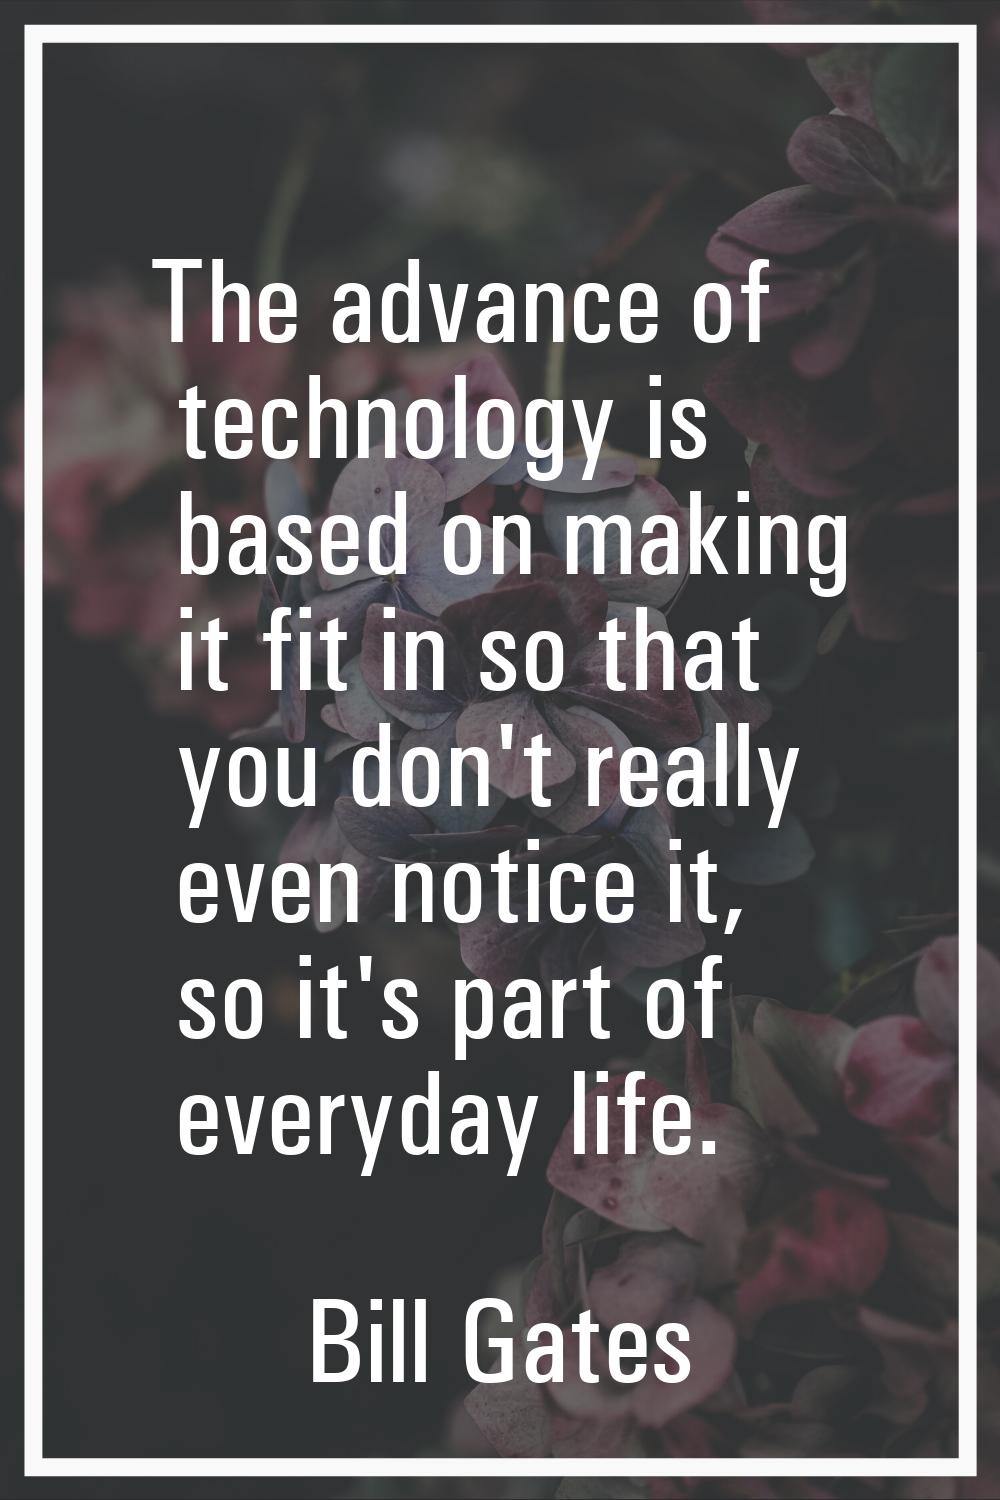 The advance of technology is based on making it fit in so that you don't really even notice it, so 